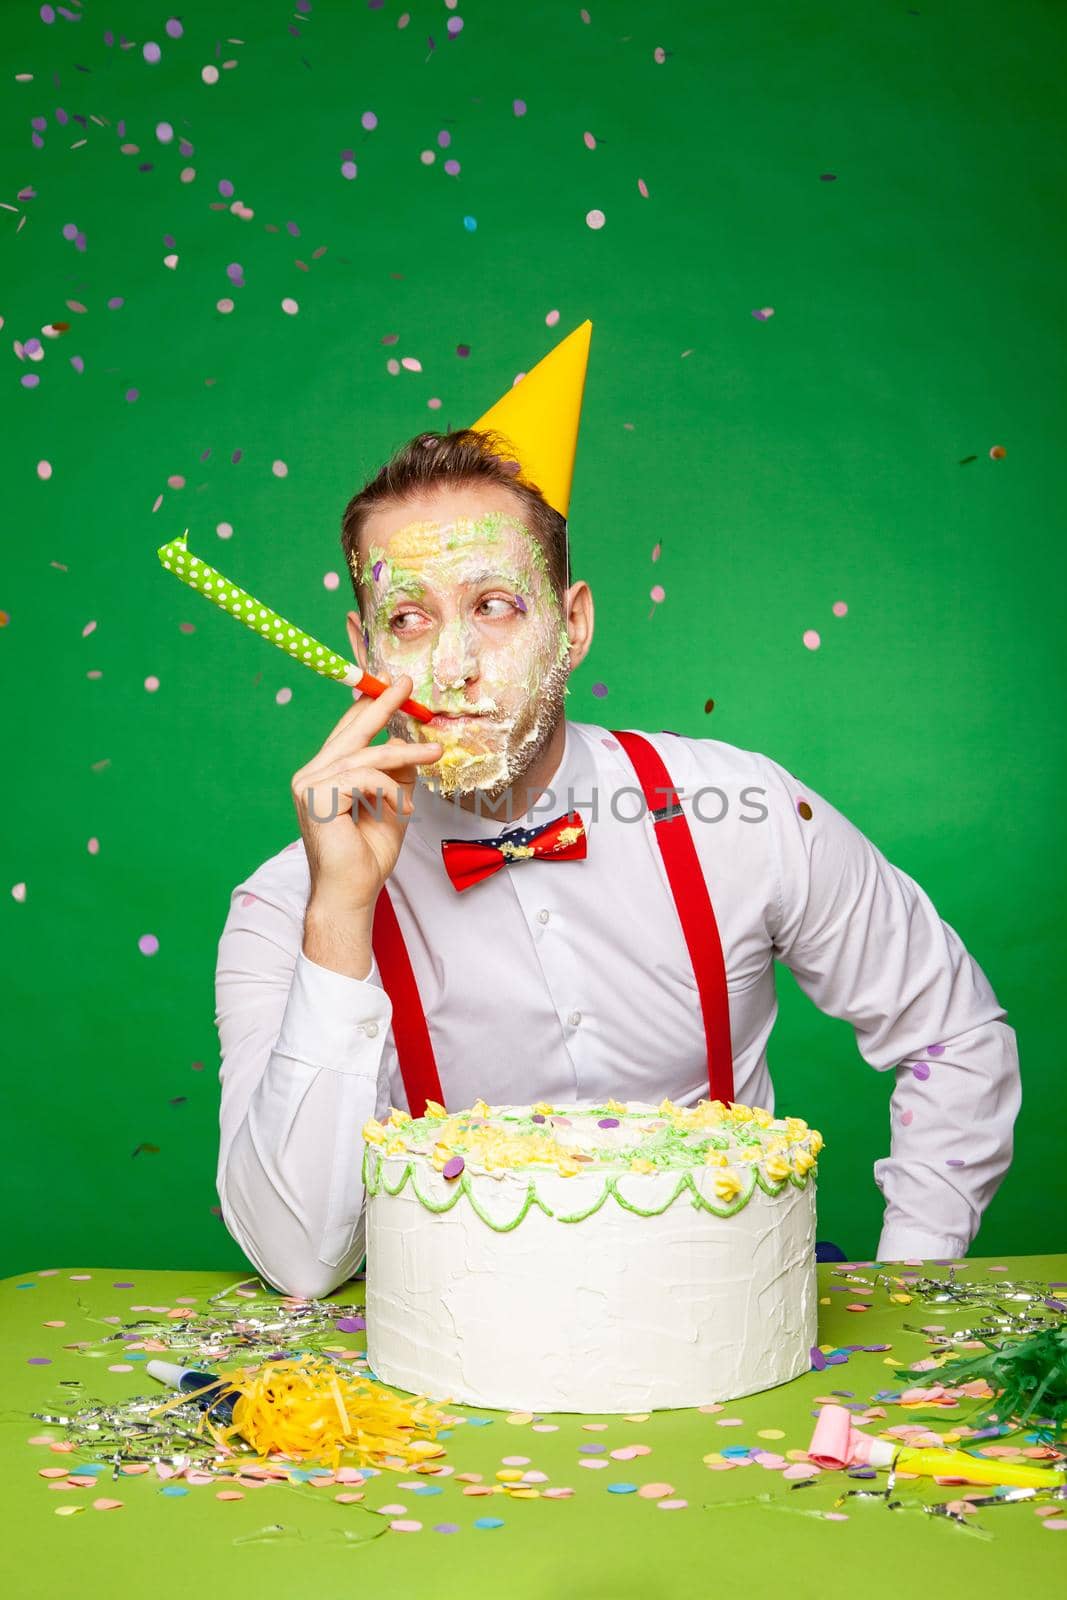 Male with face smeared in birthday cake sitting at table and blowing noisemaker during party in studio on green background